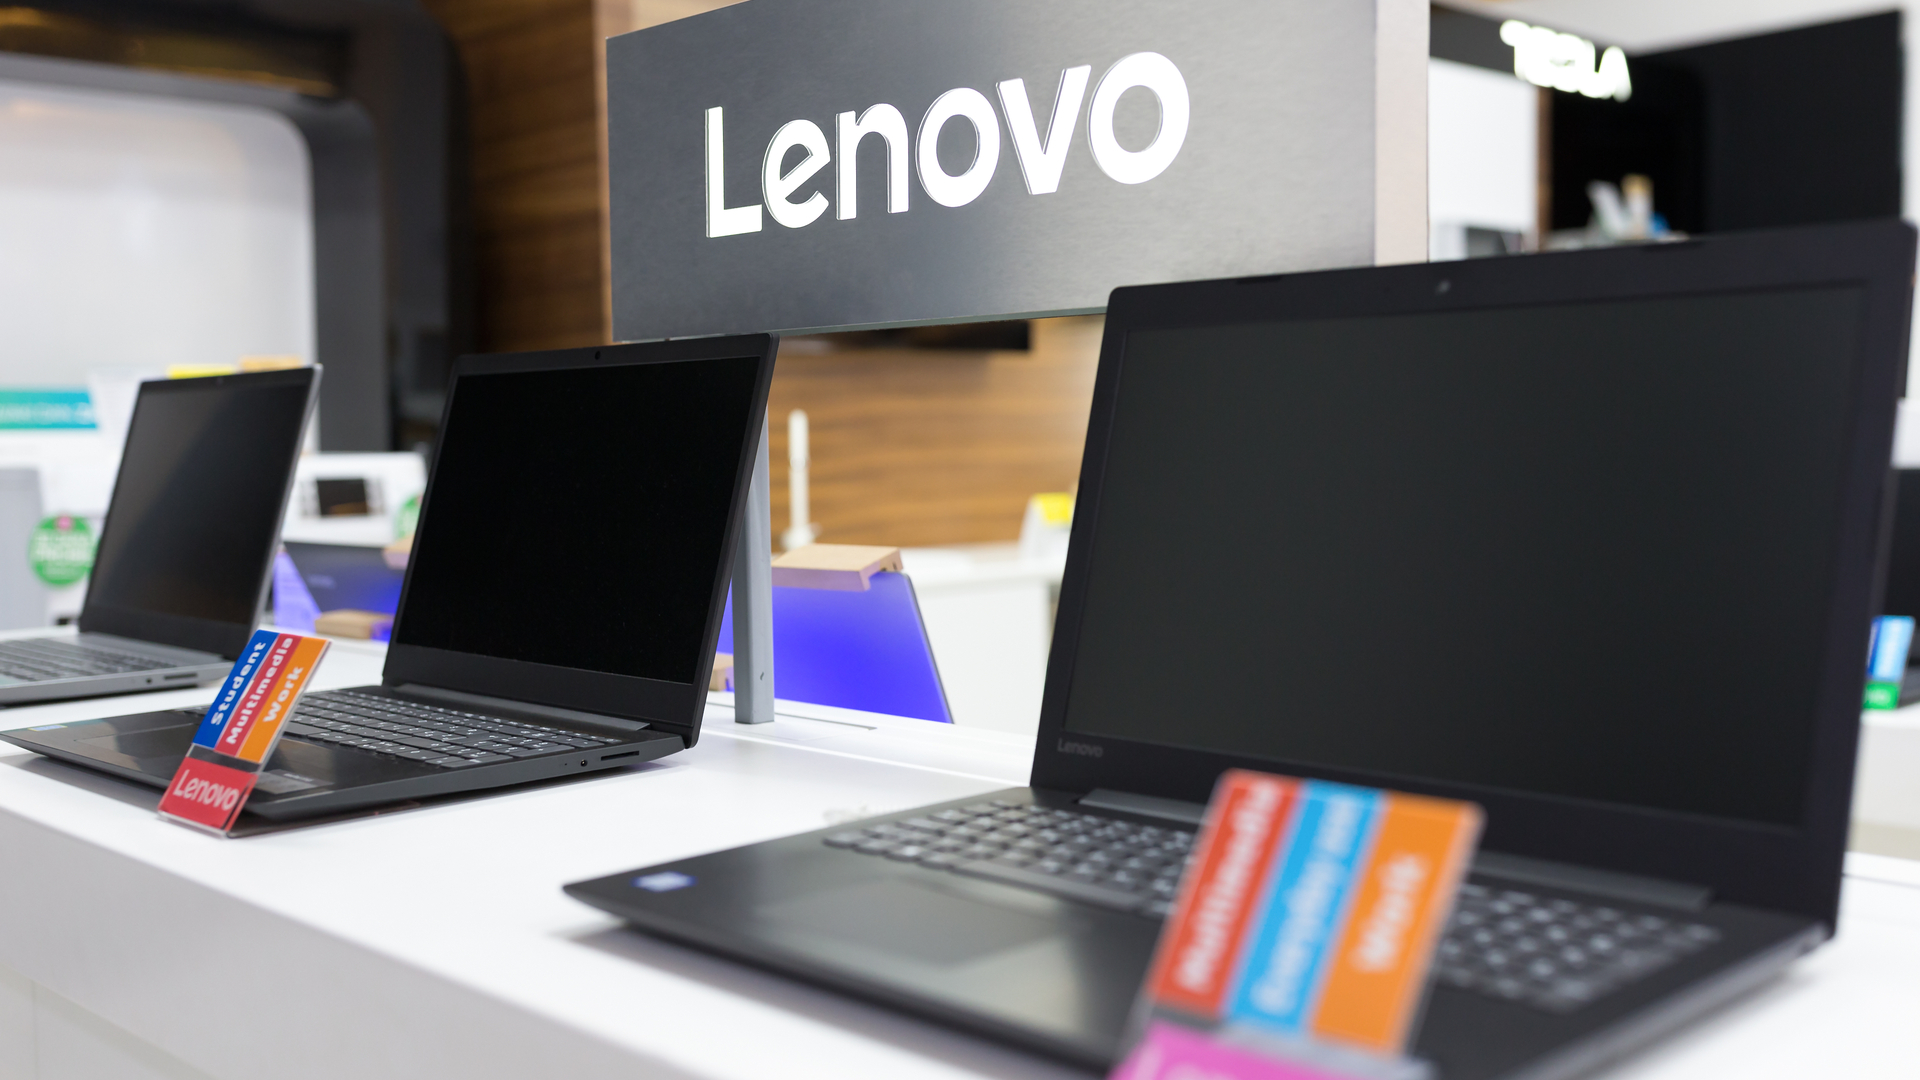 Windows 10 May 2020 Update is causing big problems for some Lenovo laptops  | TechRadar